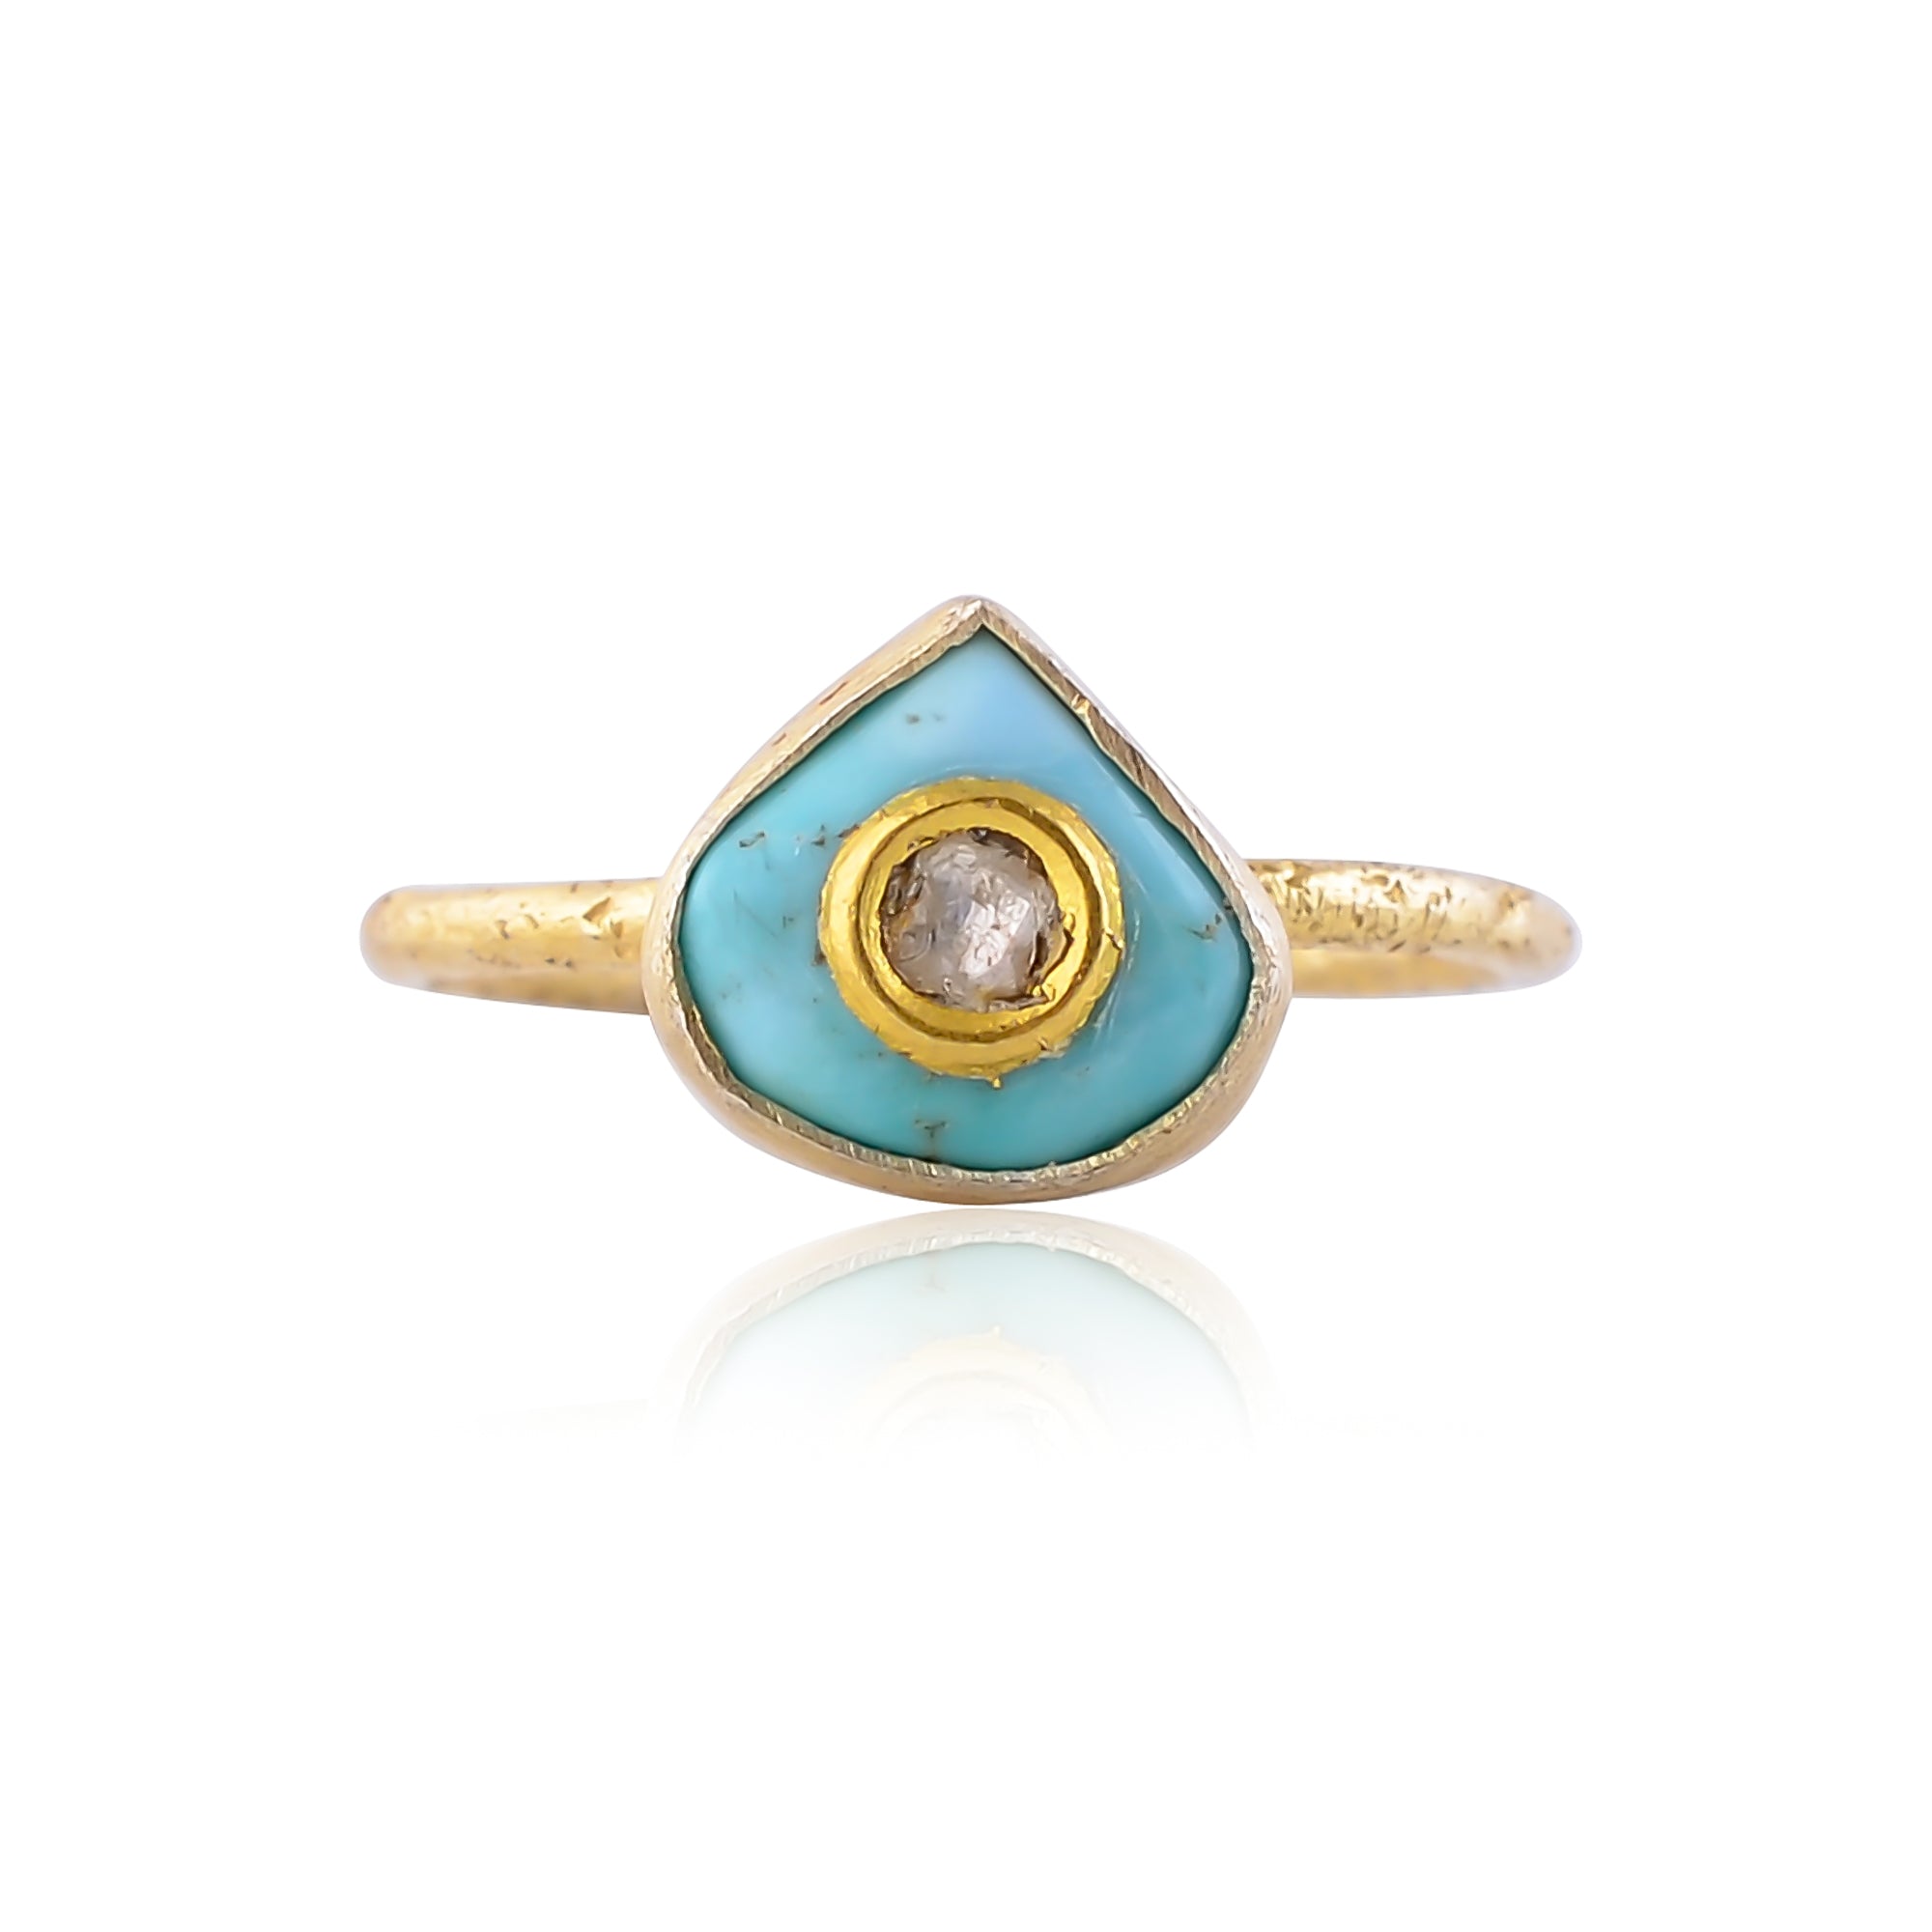 Buy Handcrafted Silver Gold Plated Turquoise/diamond Jadau Ring